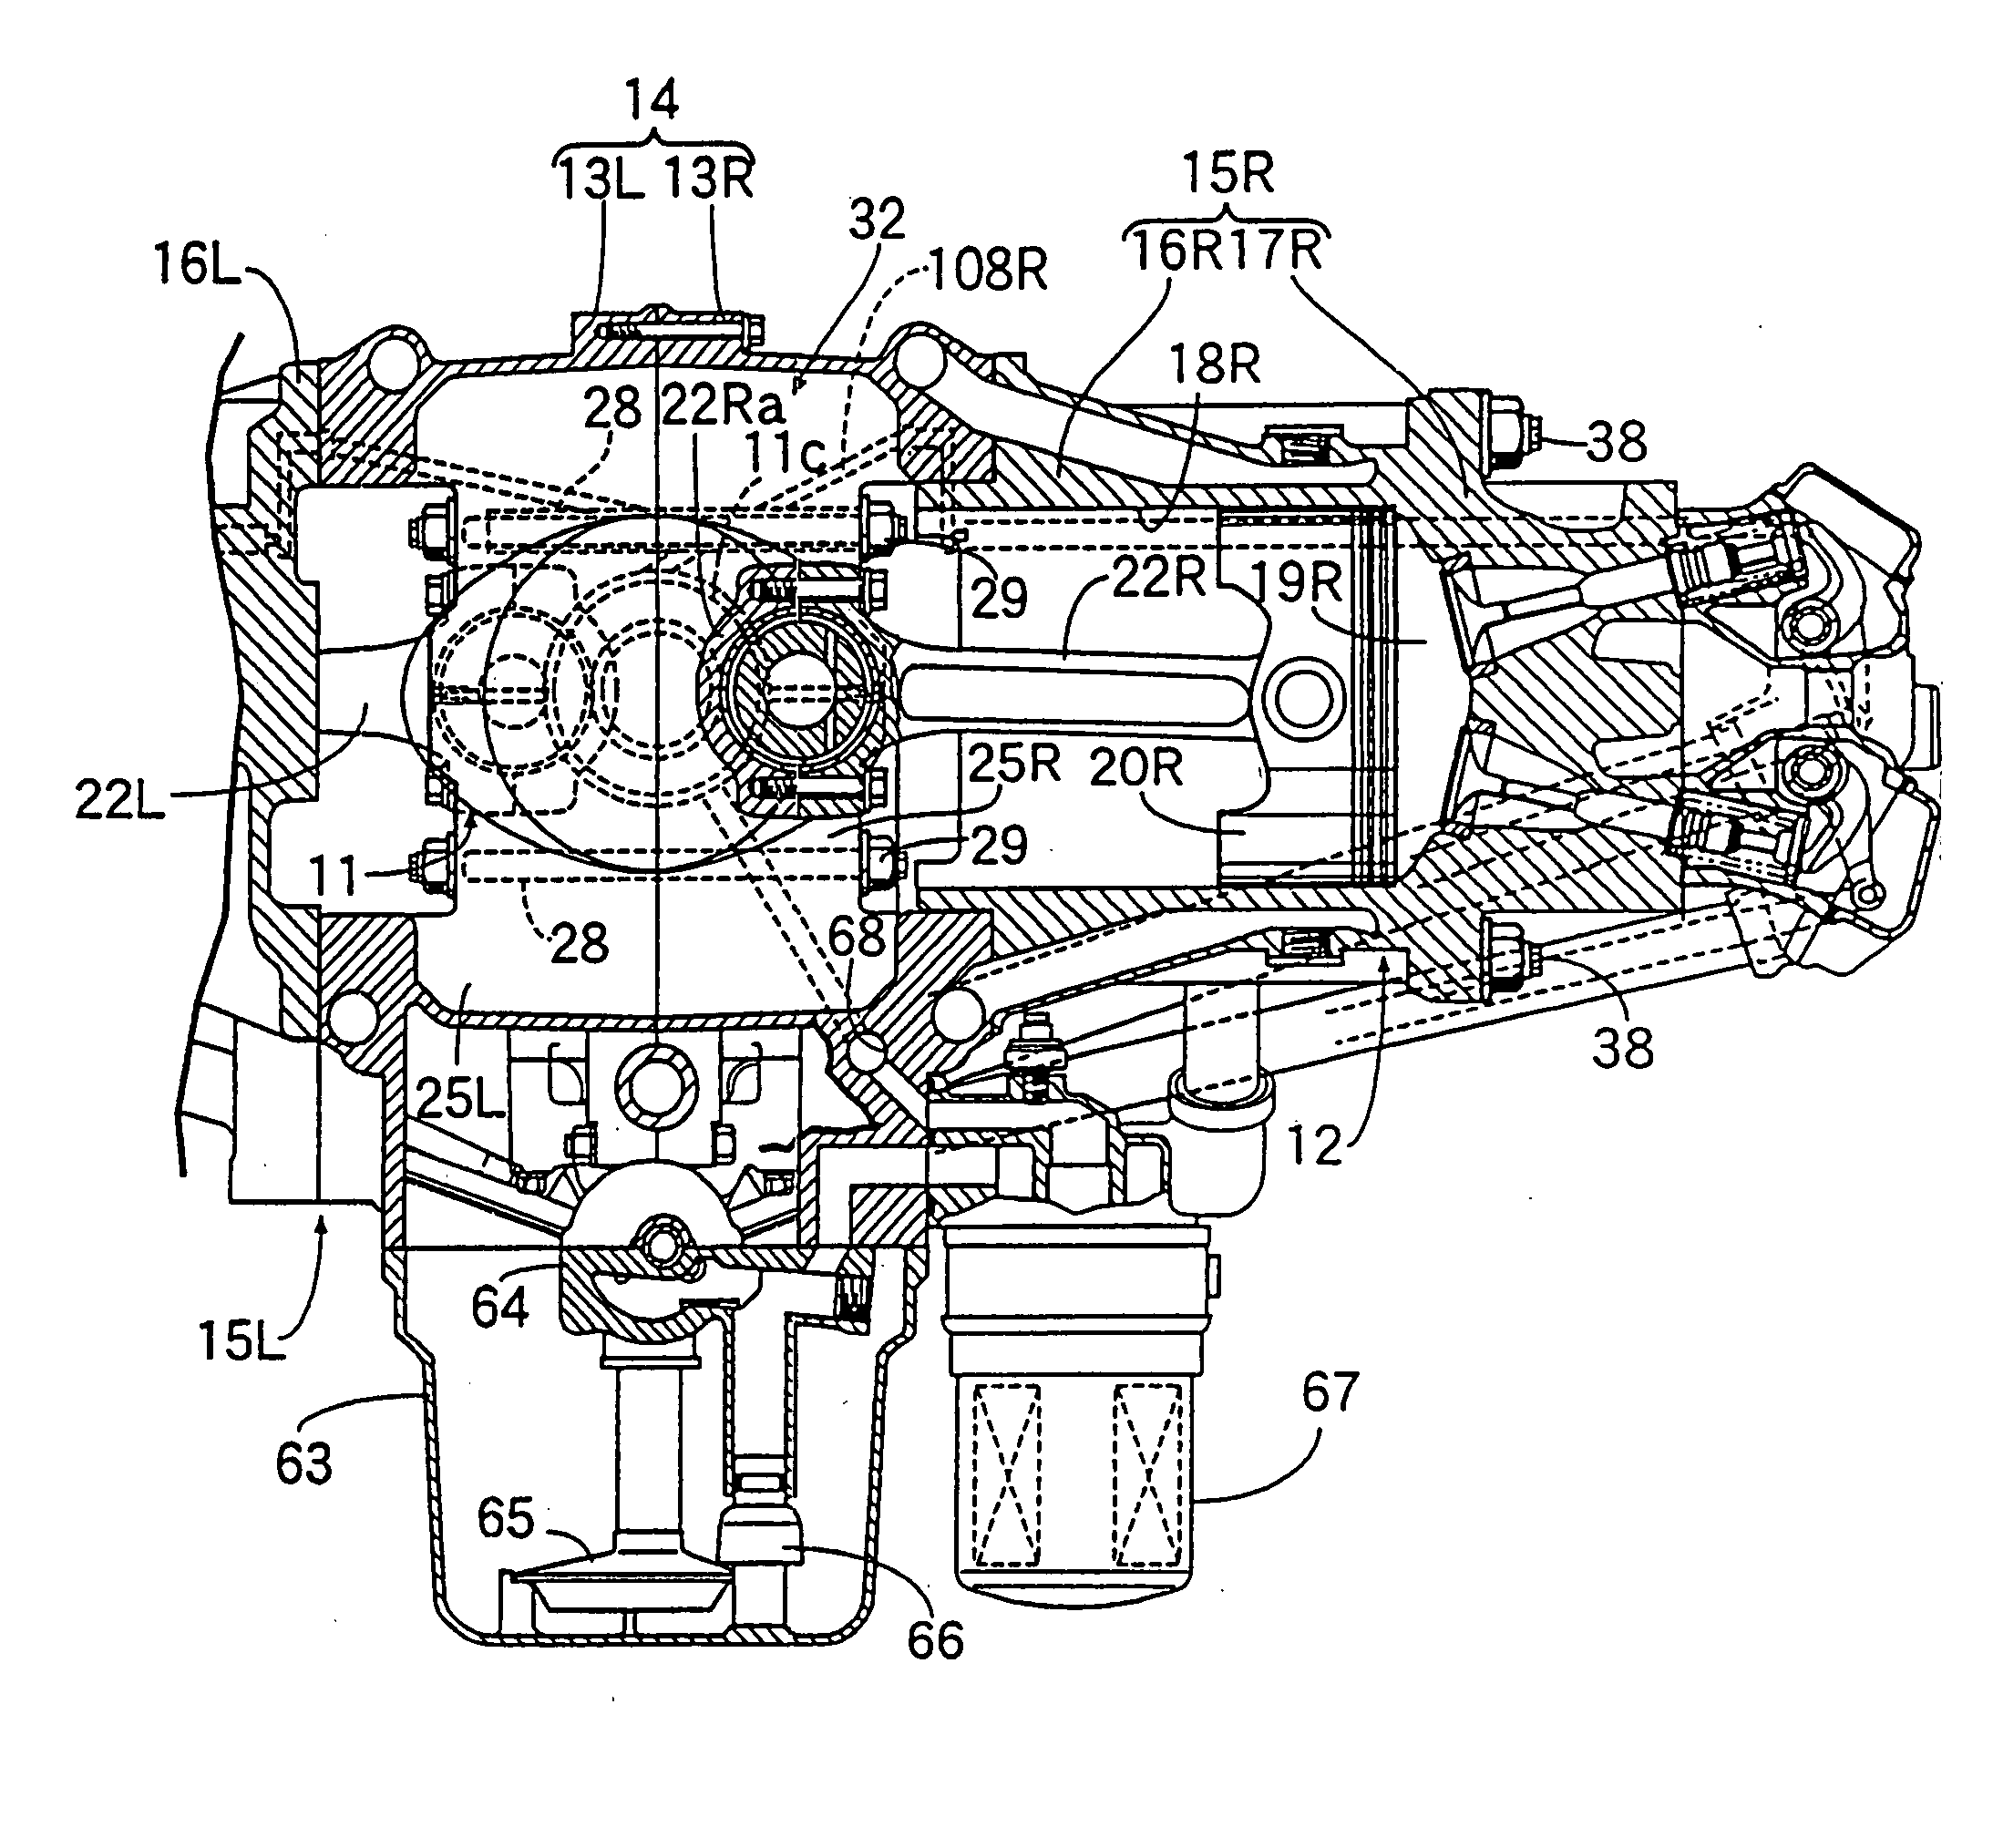 Vibration prevention structure in engine